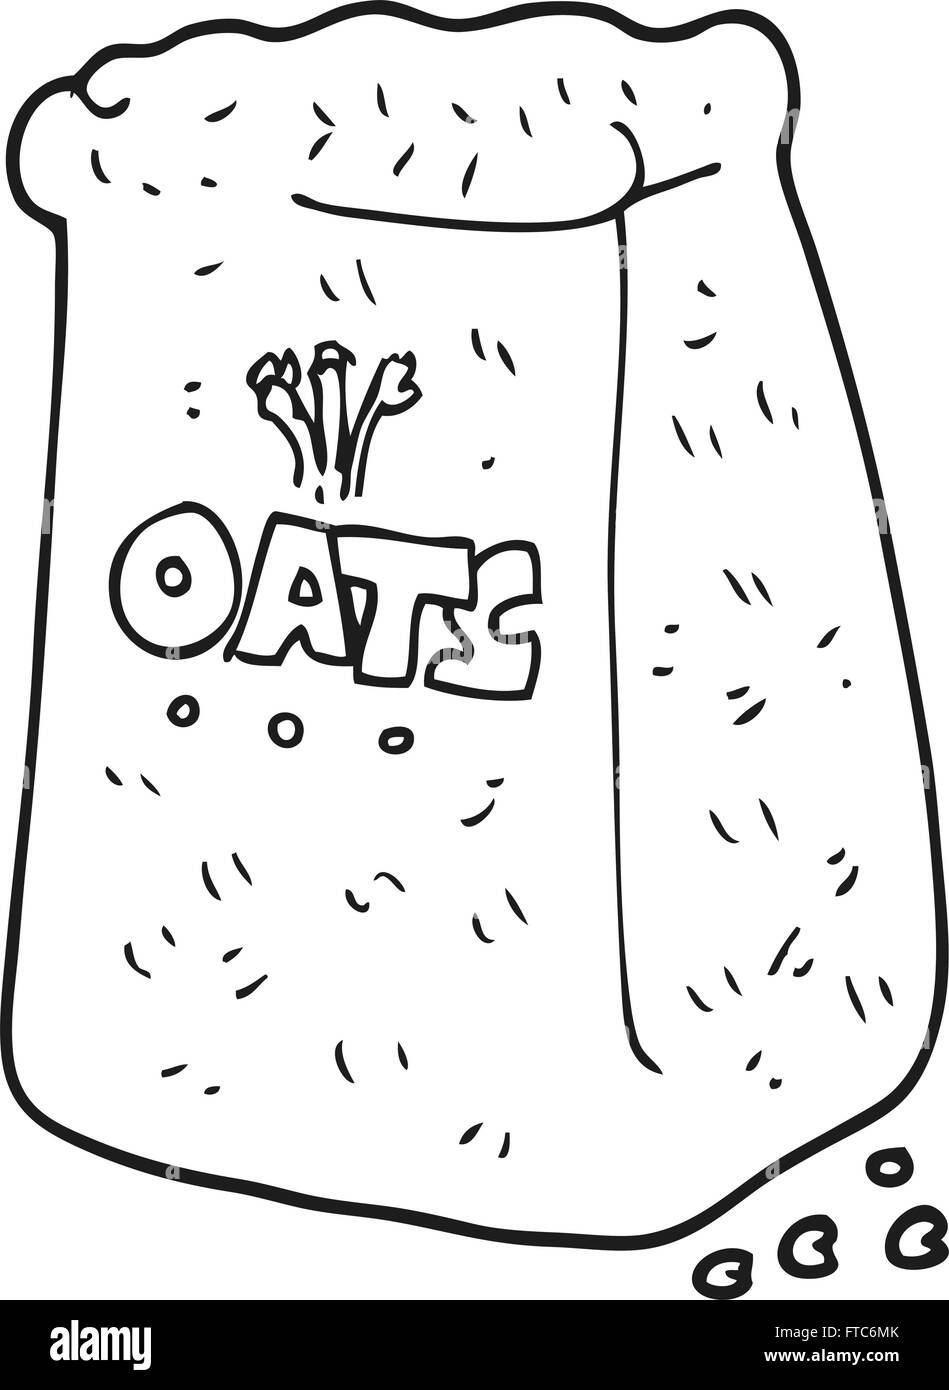 Oats Clipart Black And White Hen